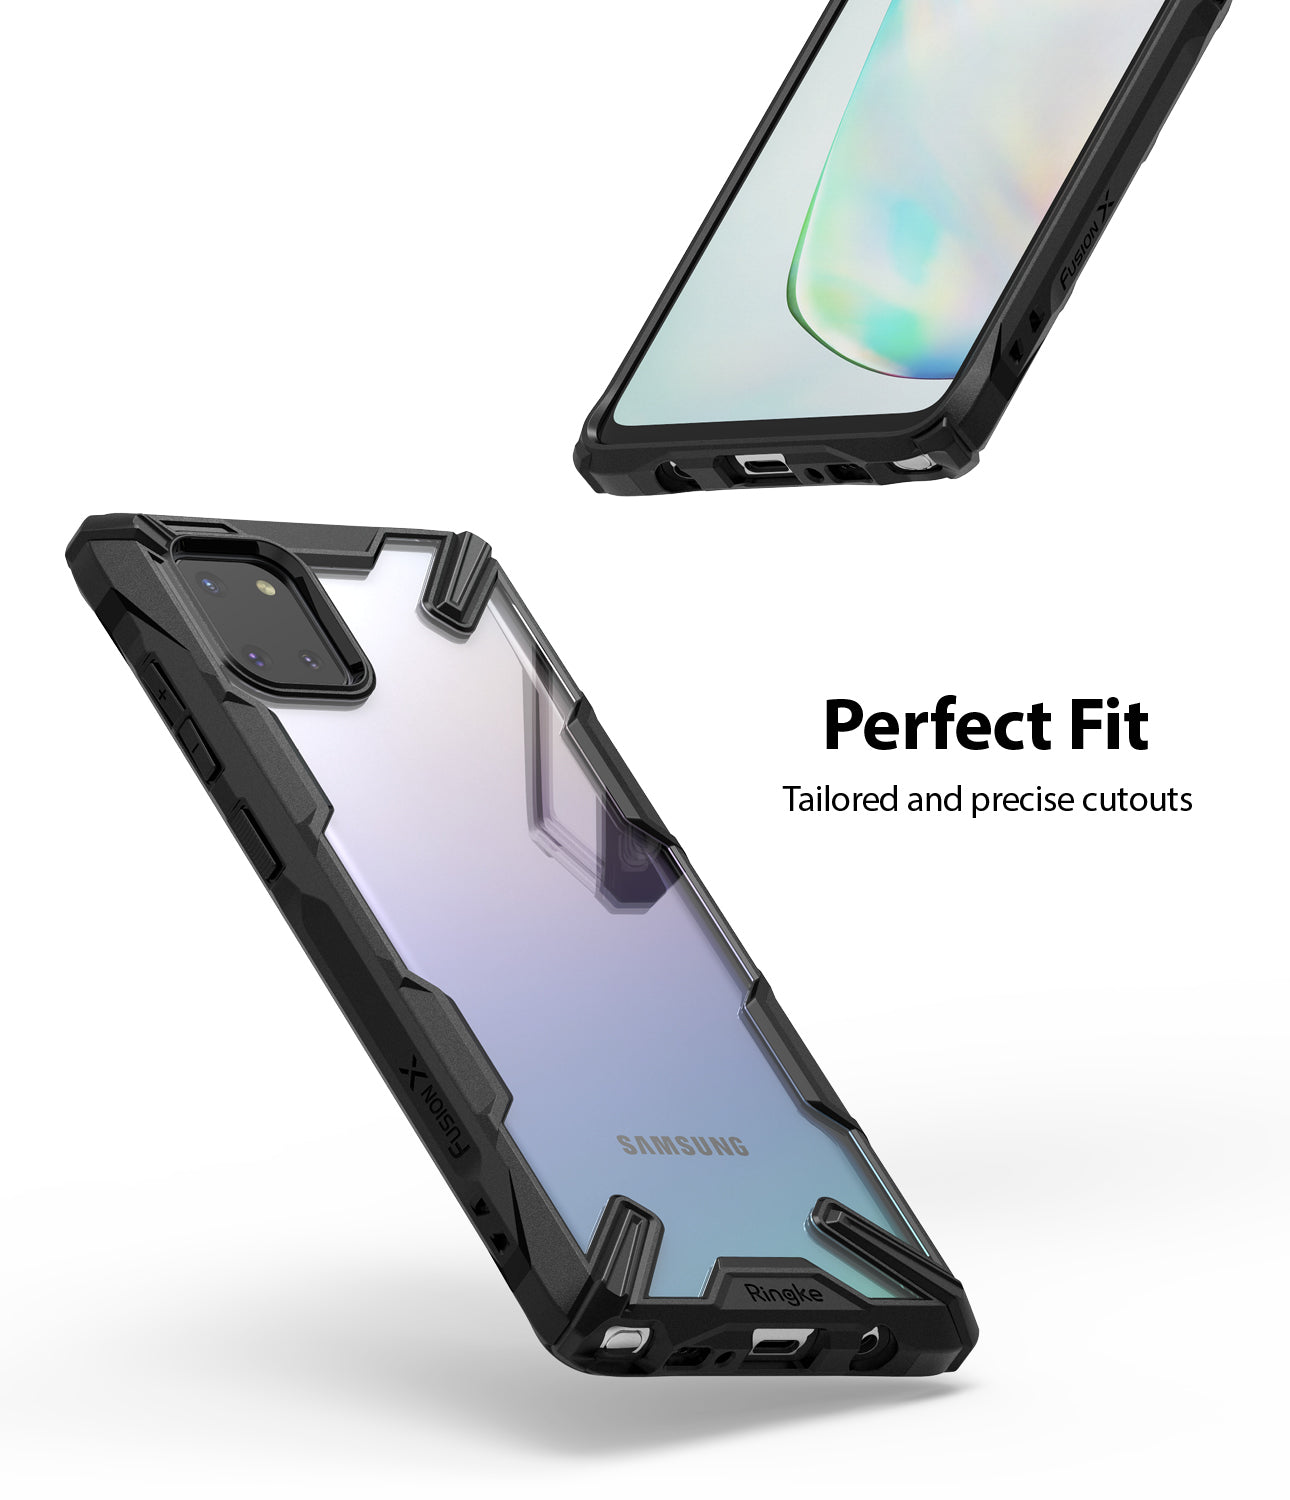 Ringke Fusion-X Case designed for Galaxy Note 10 Lite 2020, perfect fit